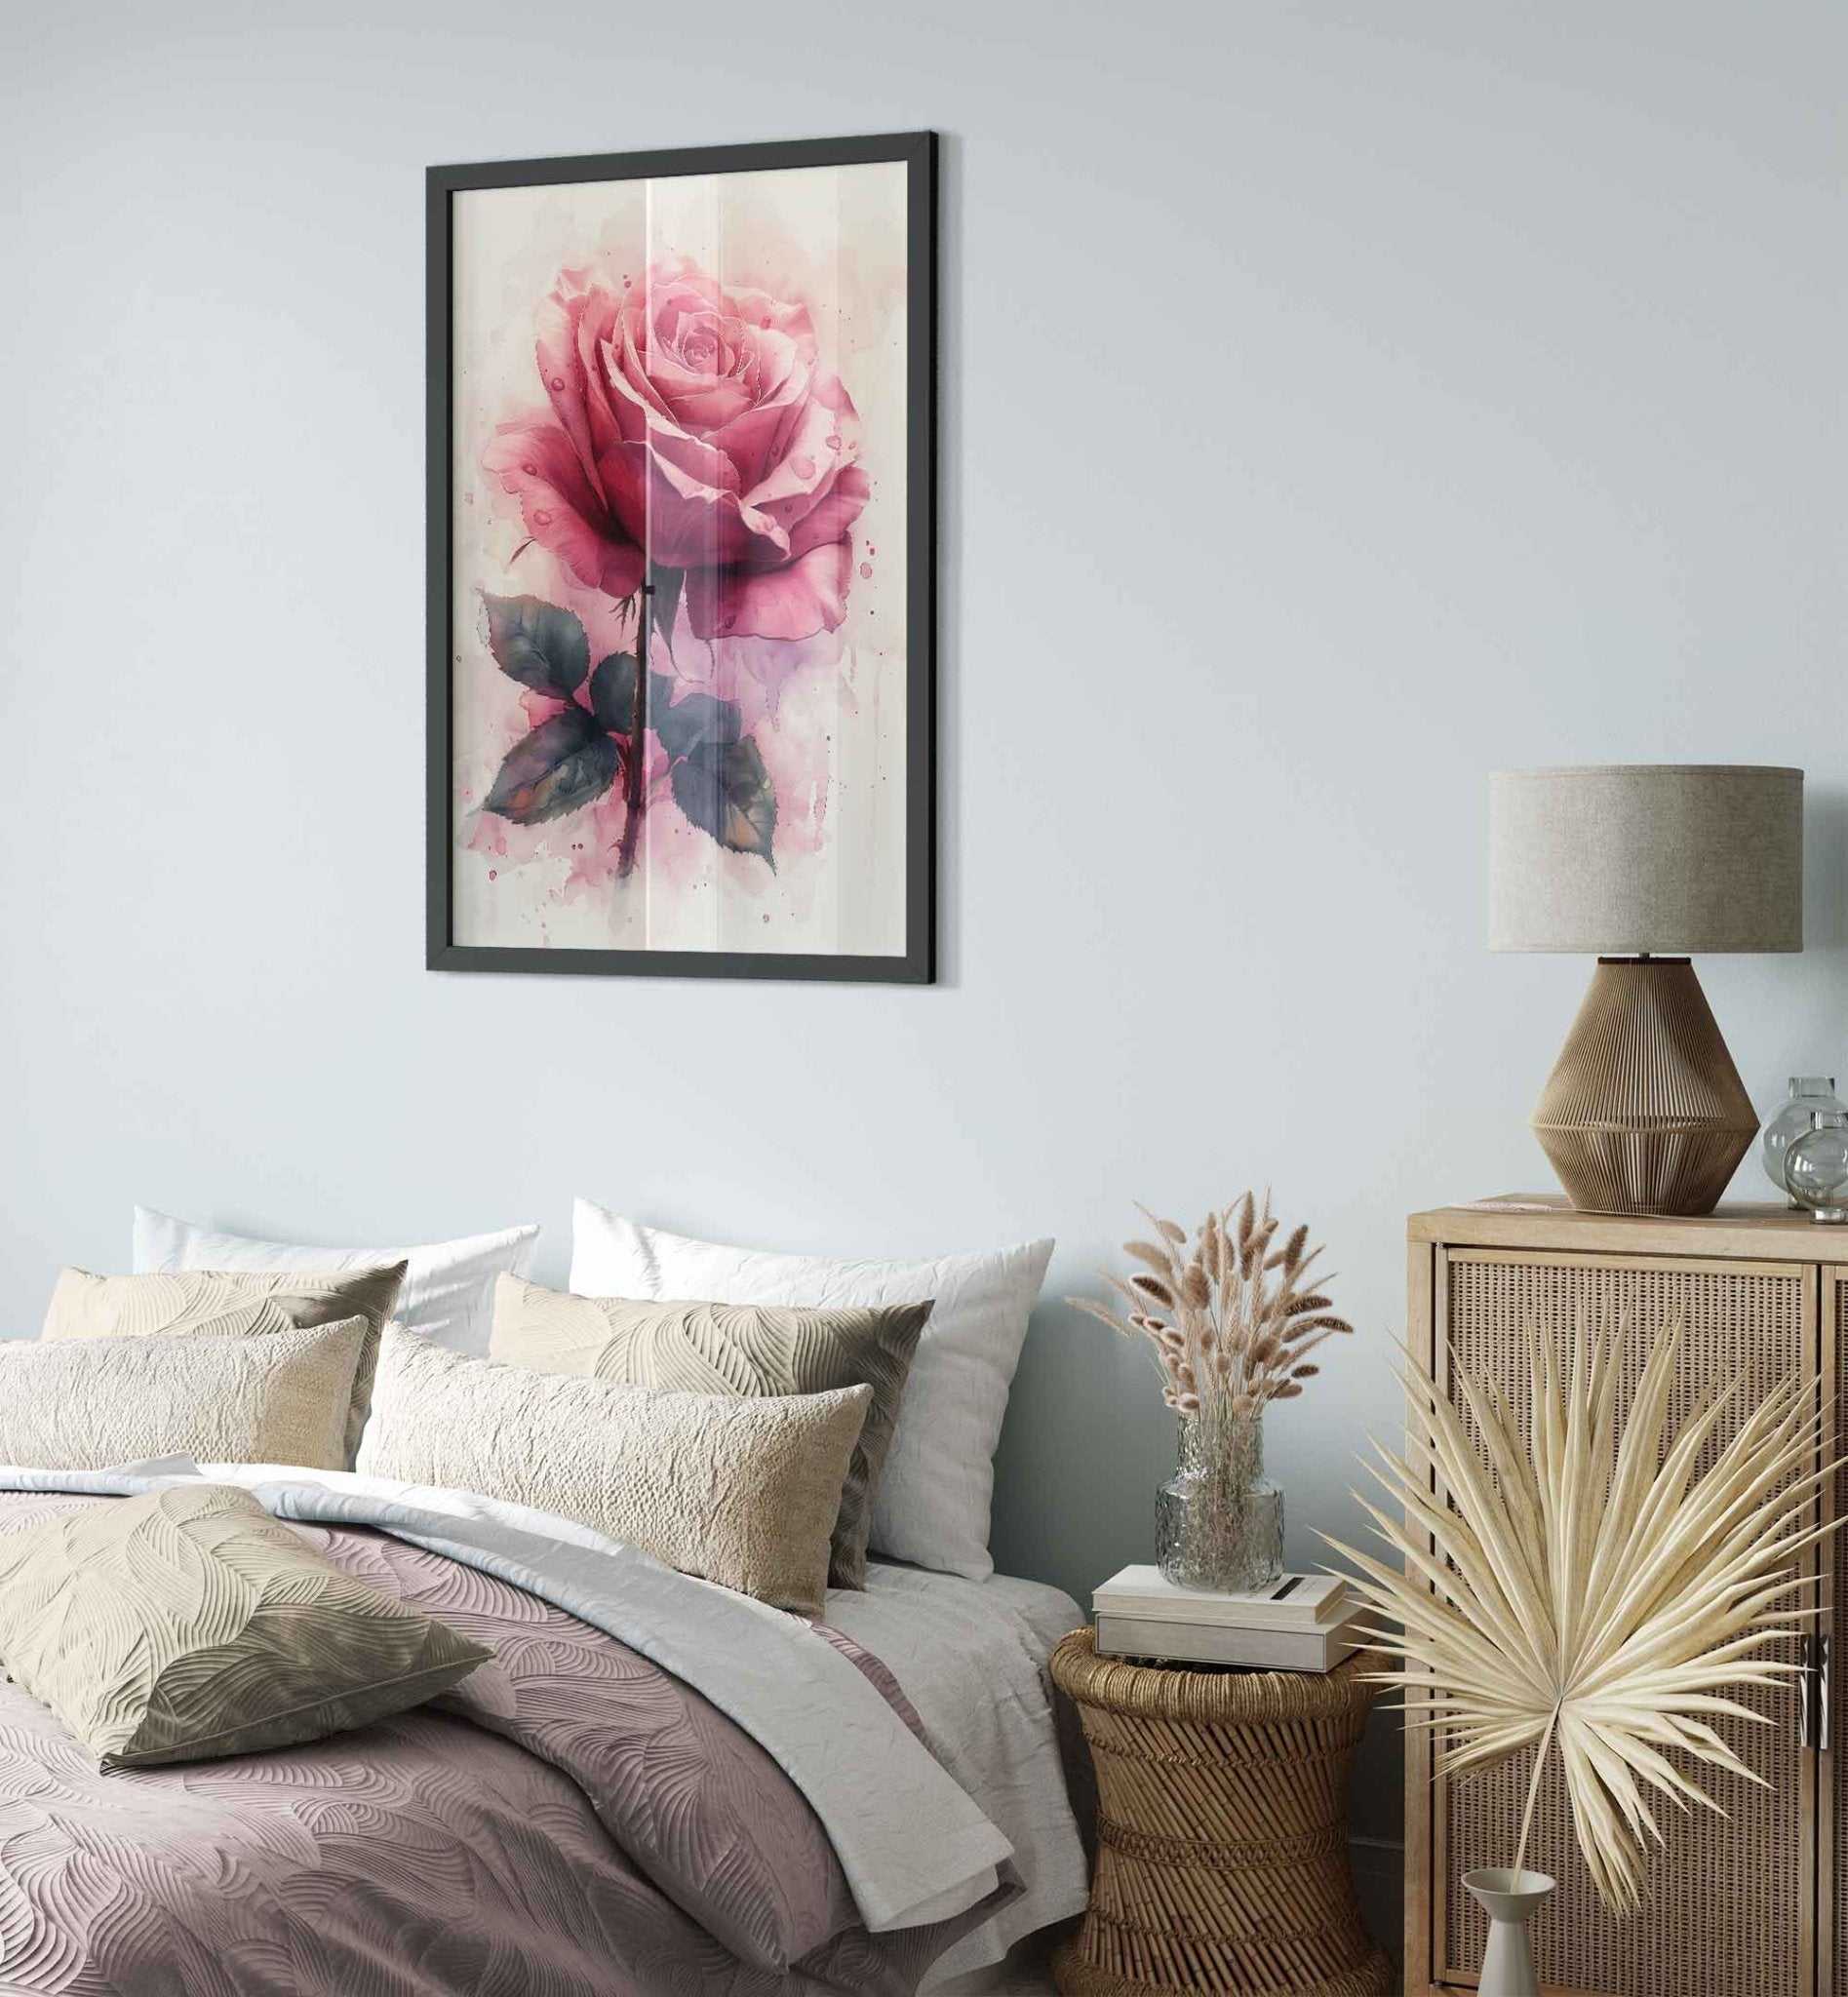 Watercolour Rose Framed Poster Print, Available In Different Coloured Frames - WallArtPrints4U